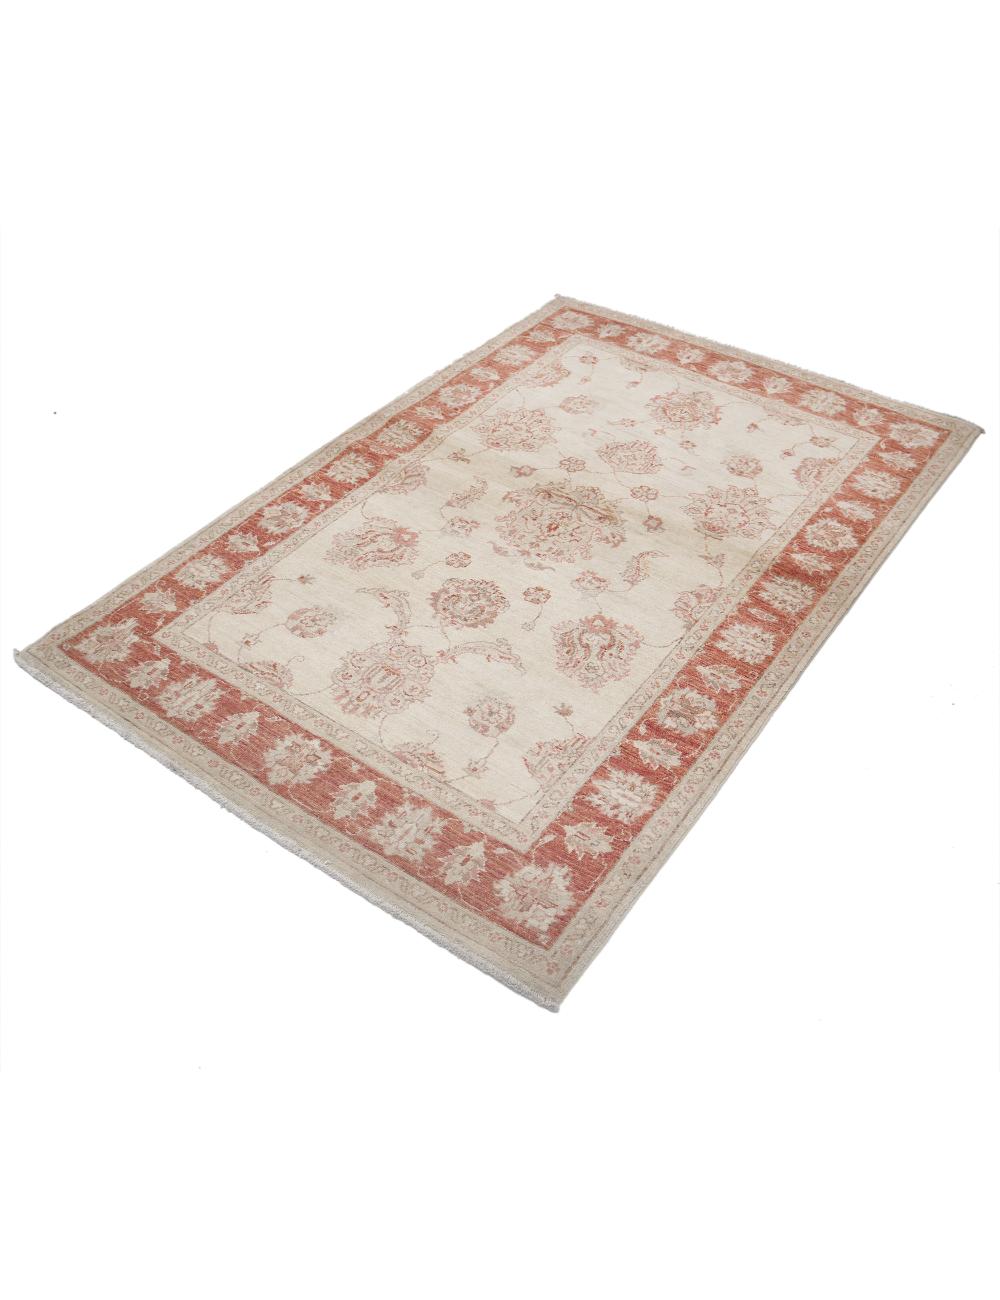 Ziegler 3' 11" X 6' 1" Hand-Knotted Wool Rug 3' 11" X 6' 1" (119 X 185) / Ivory / Red